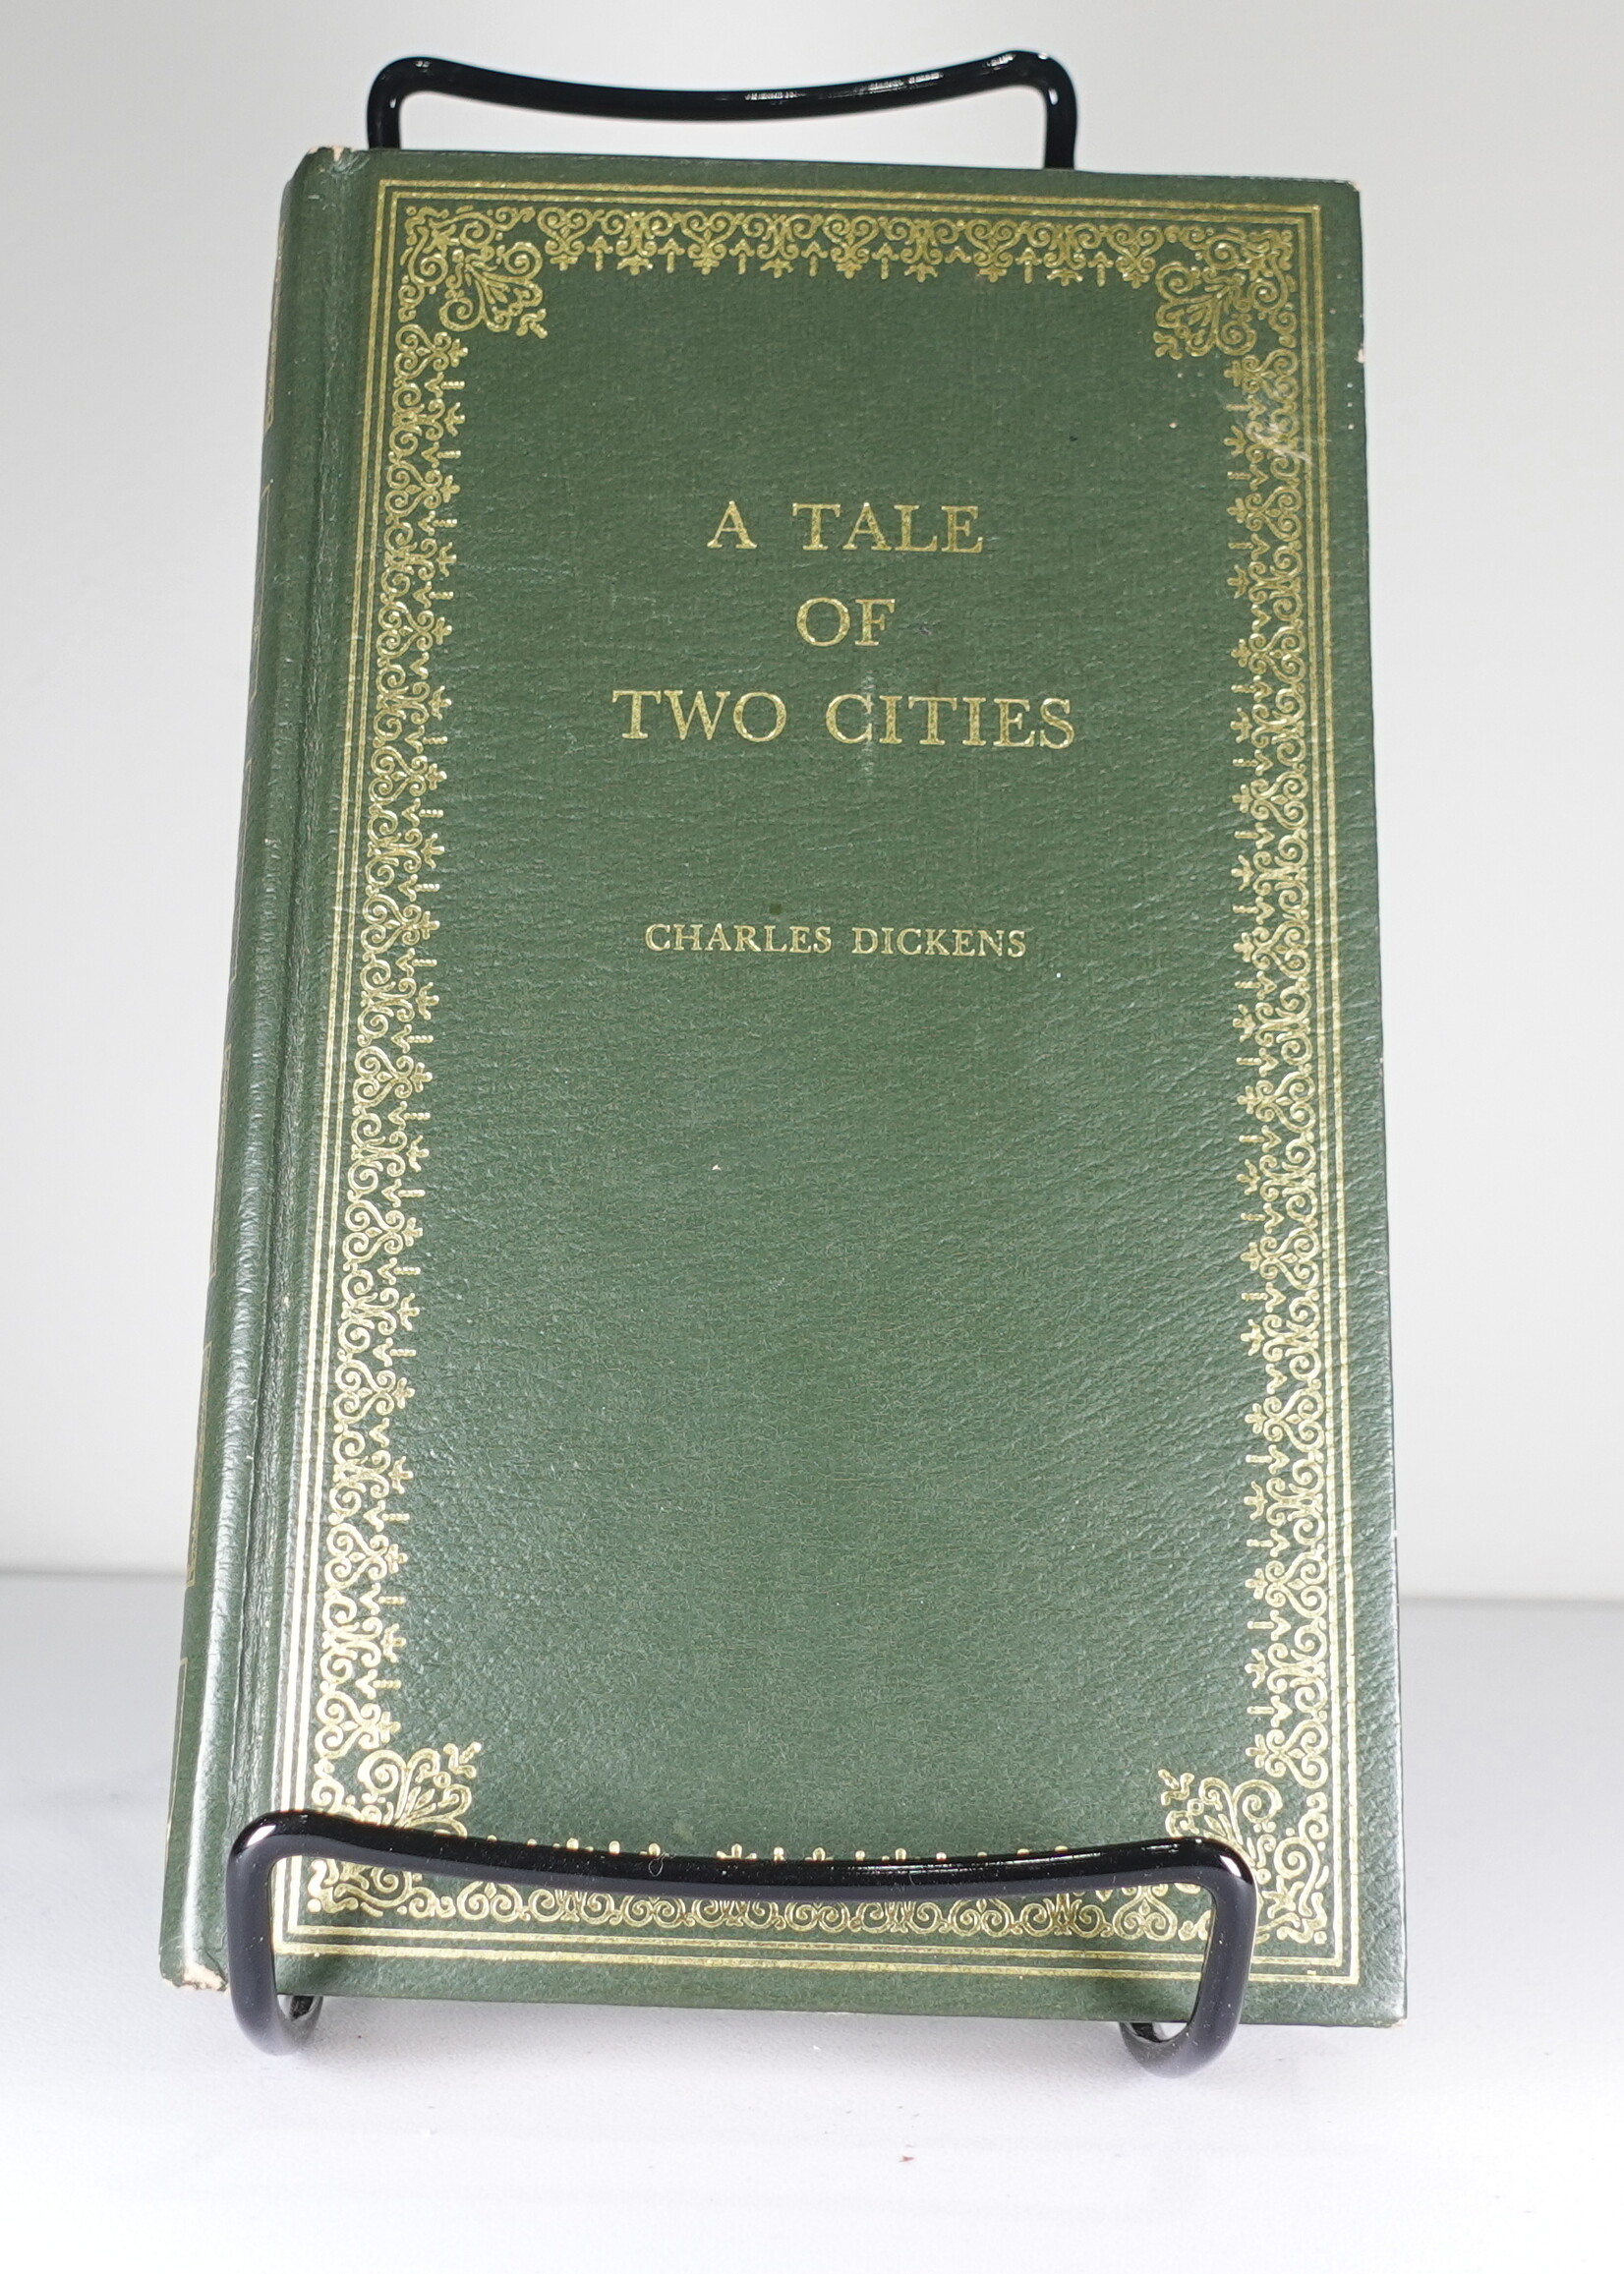 Peebles Classic Library A Tale of Two Cities (Peebles Classic Library) 1969